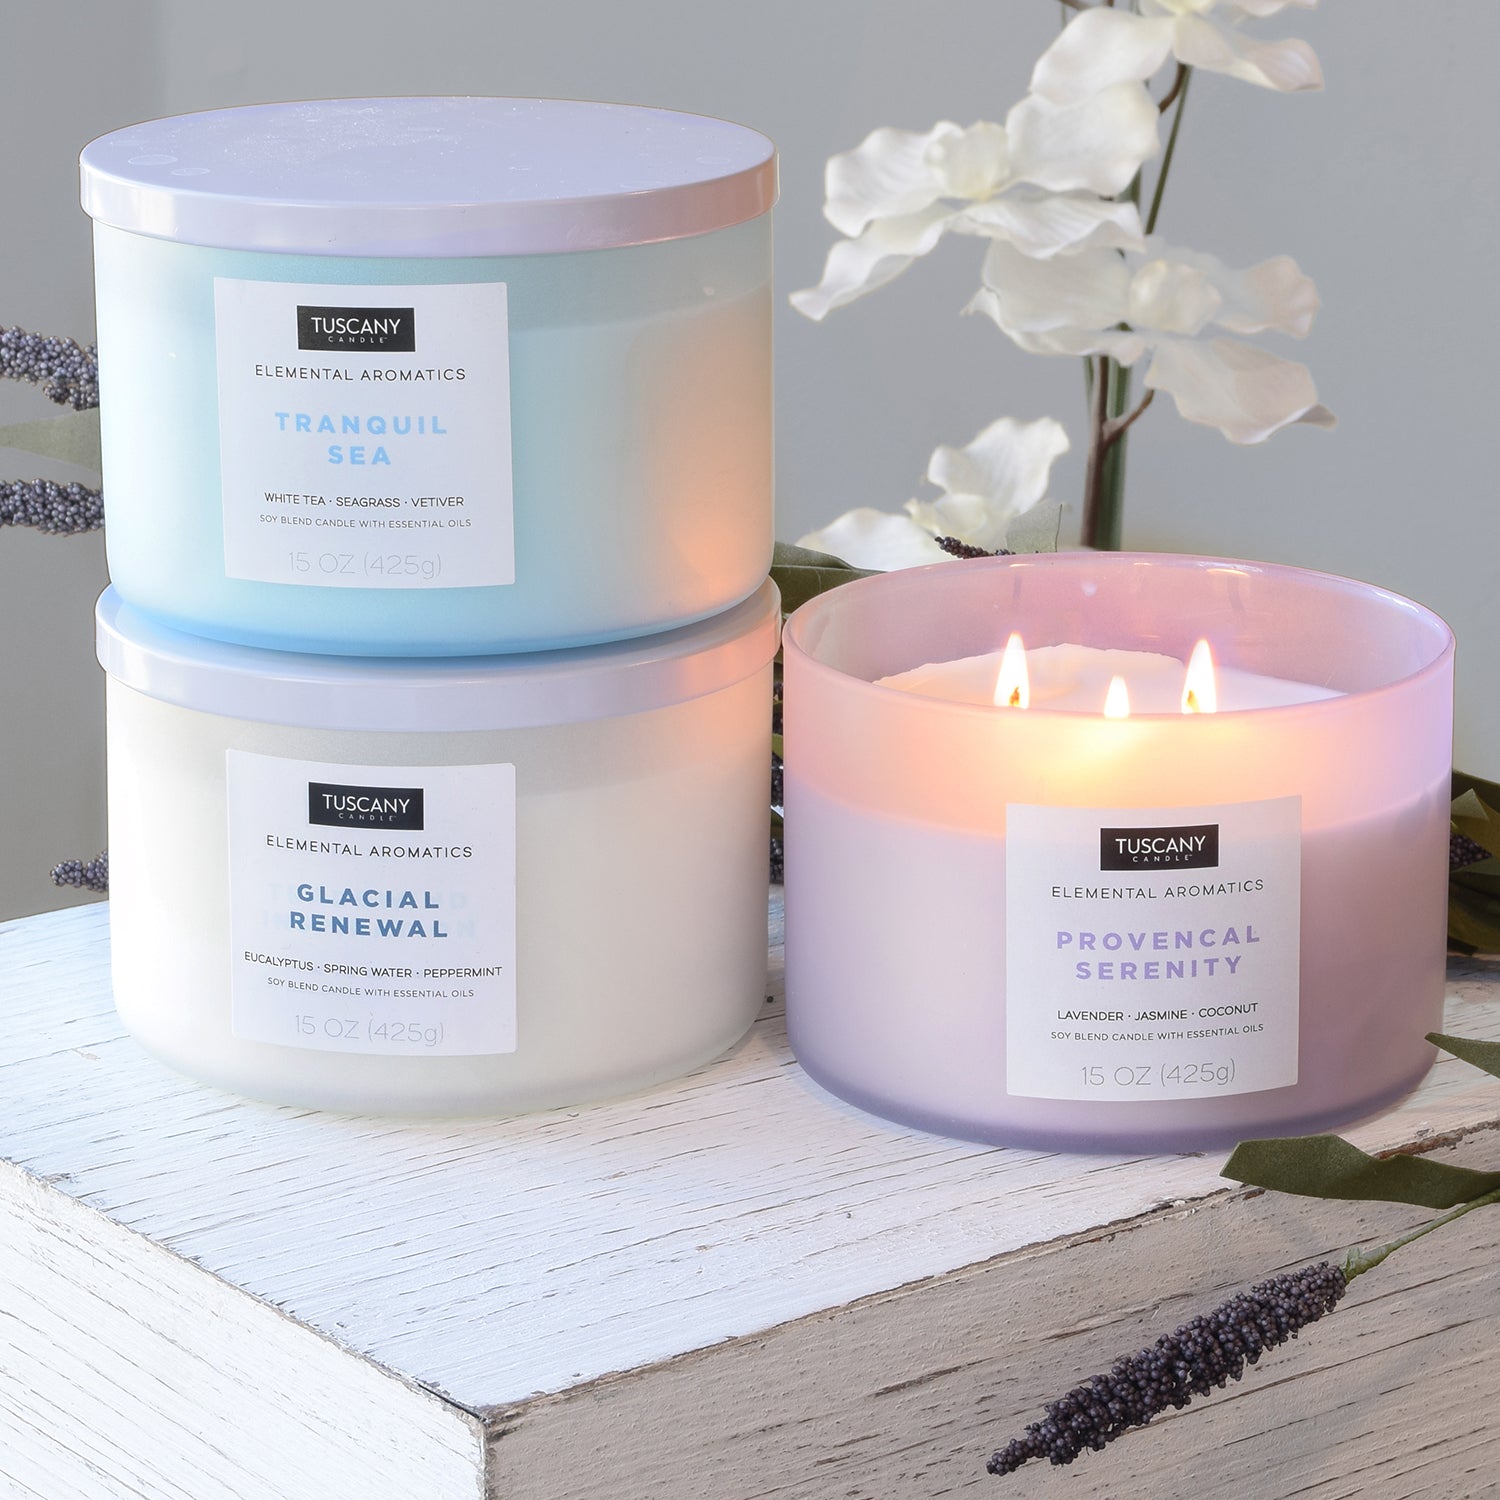 Three jars of Tranquil Sea Scented Jar Candles (15oz) from the Elemental Aromatics Collection, by Tuscany Candle® EVD, on a table.